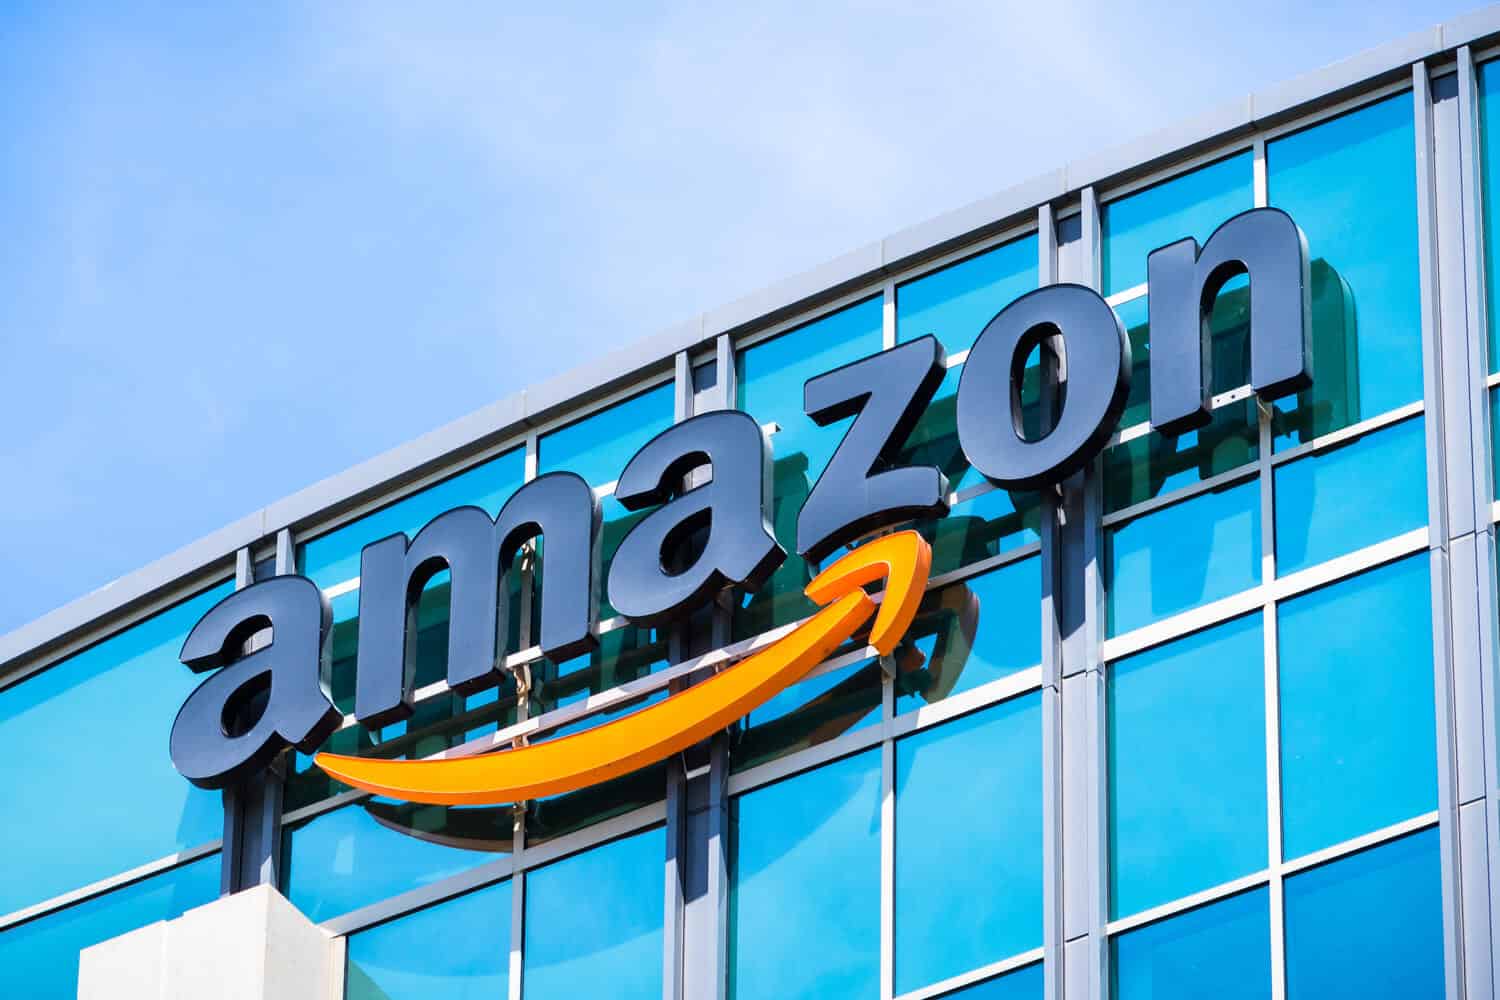 US Appeals Court Says Amazon Can Be Held Liable for Products from Third Party Sellers